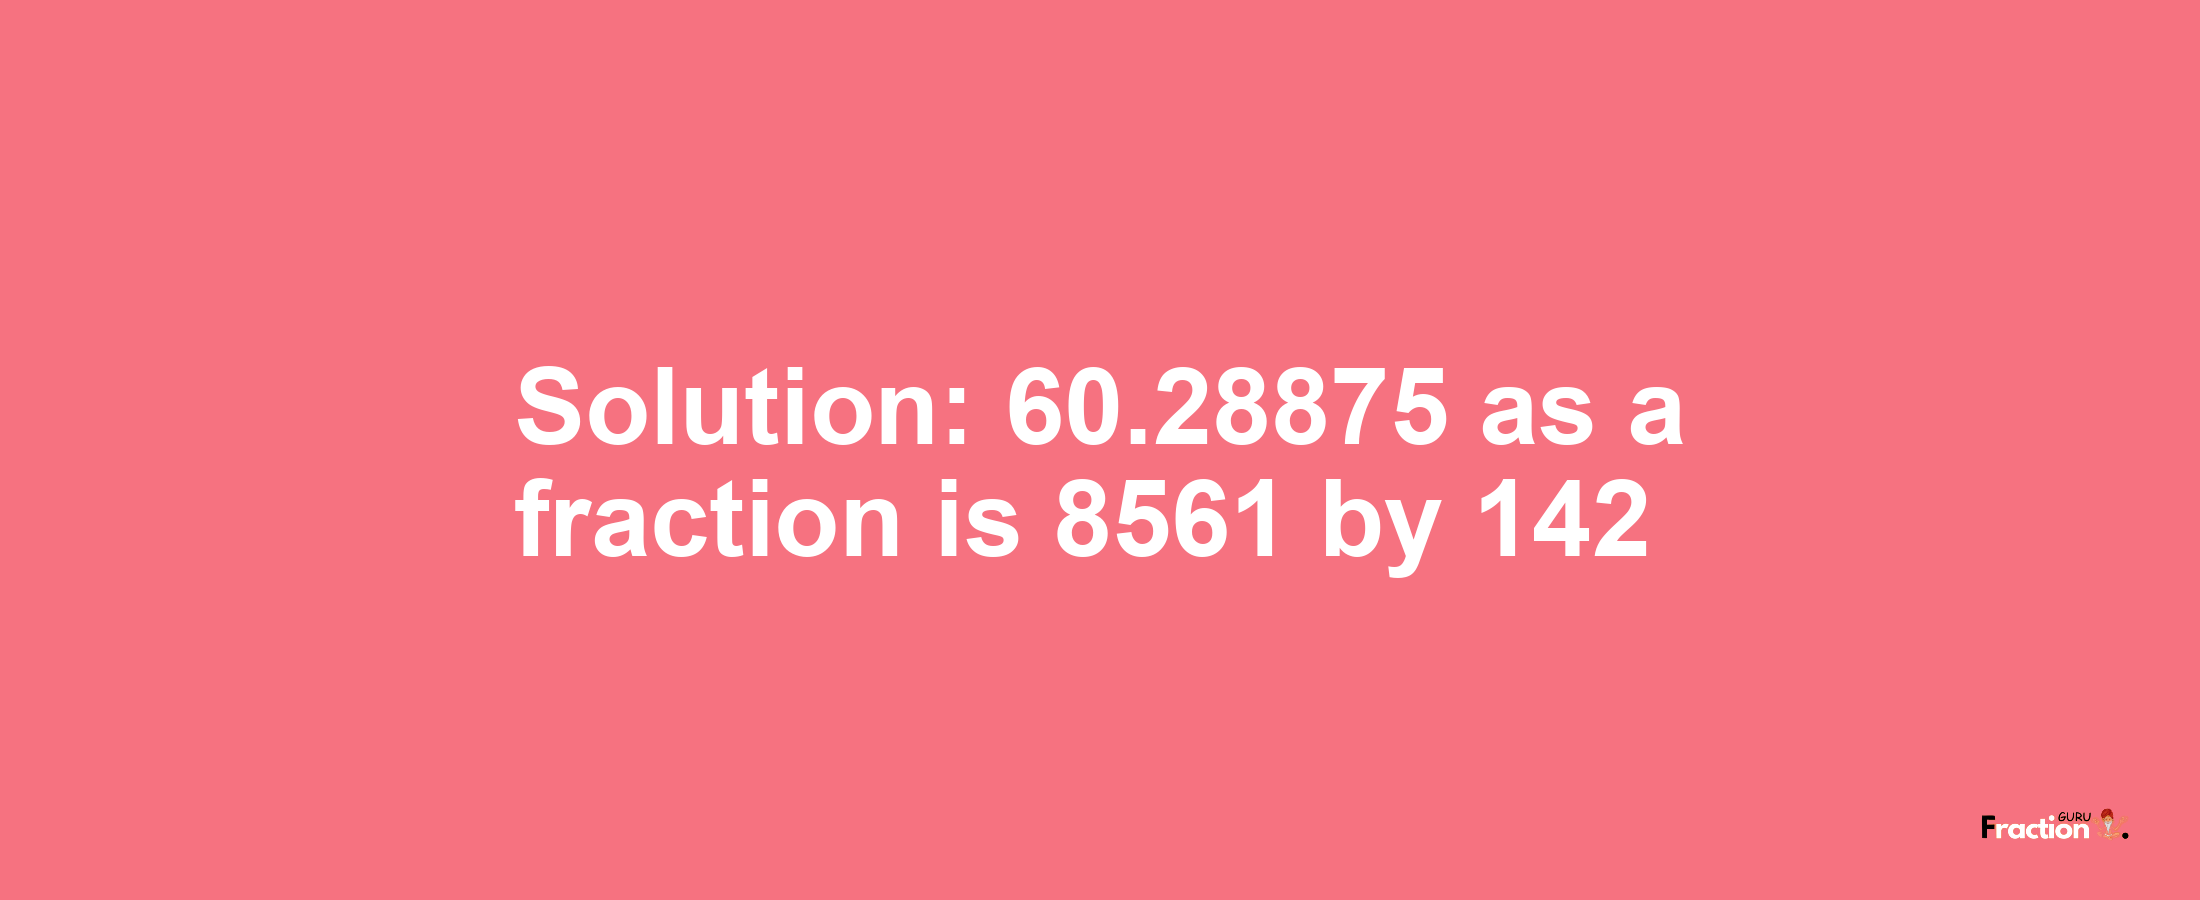 Solution:60.28875 as a fraction is 8561/142